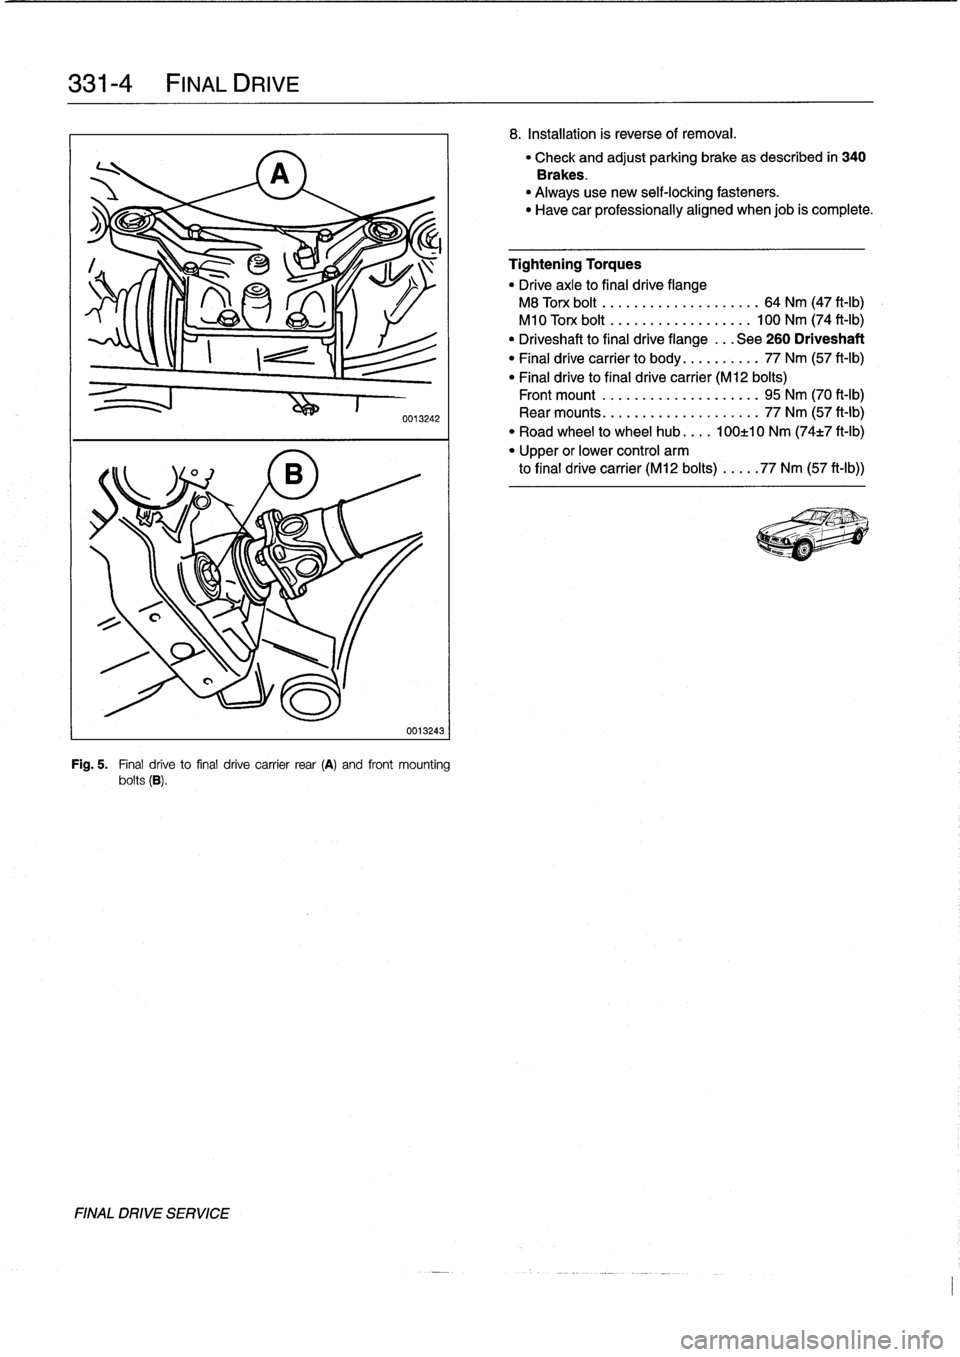 BMW 323i 1993 E36 Owners Manual 
331-
4

	

FINAL
DRIVE

FINAL
DRIVE
SERVICE

0013242
0013243

Fig
.
5
.

	

Final
drive
to
final
drive
carrier
rear
(A)
and
front
mounting
bolts
(B)
.

8
.
Installation
is
reverse
of
removal
.

"
Che